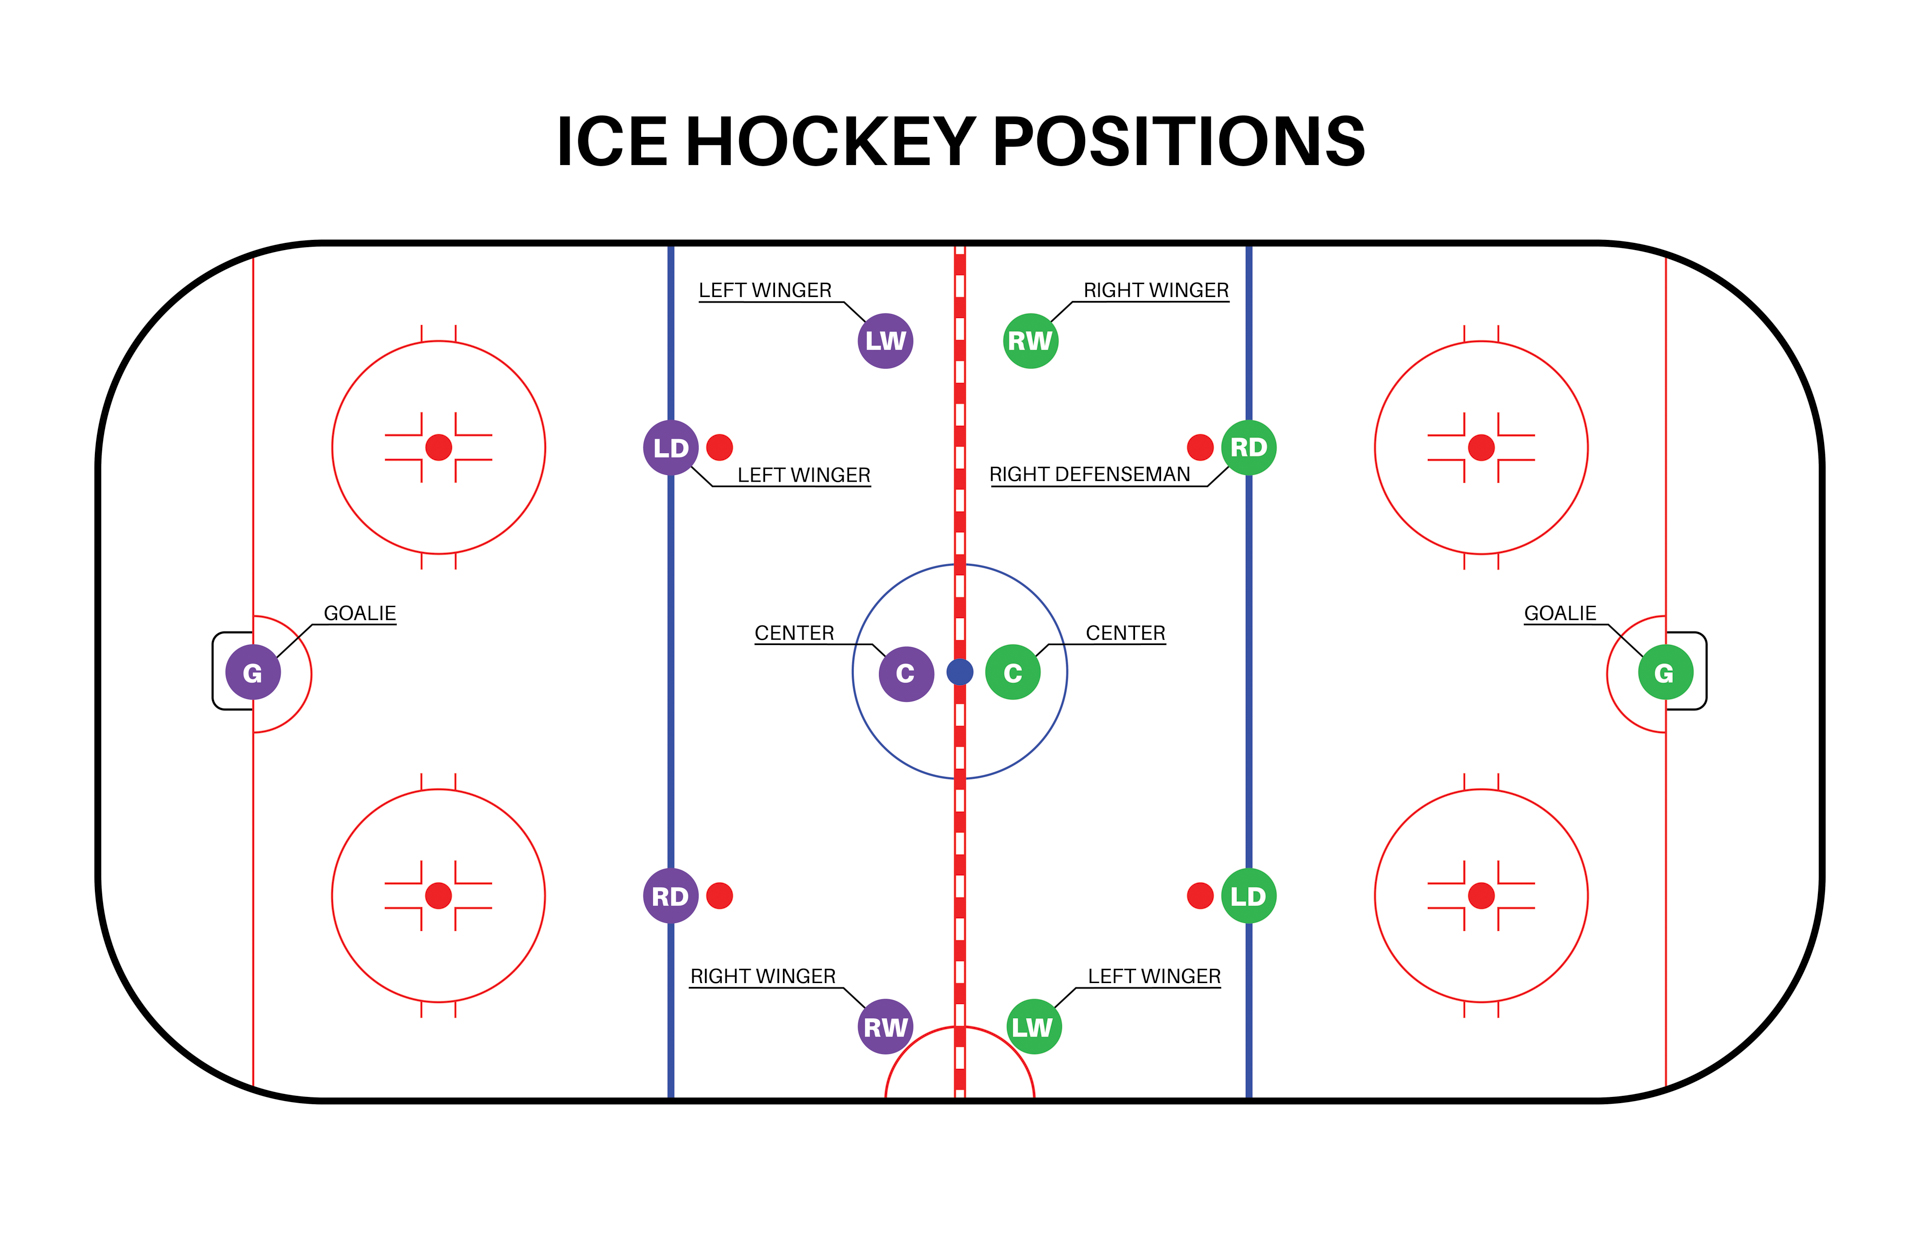 The Directory - Your guide to ice hockey